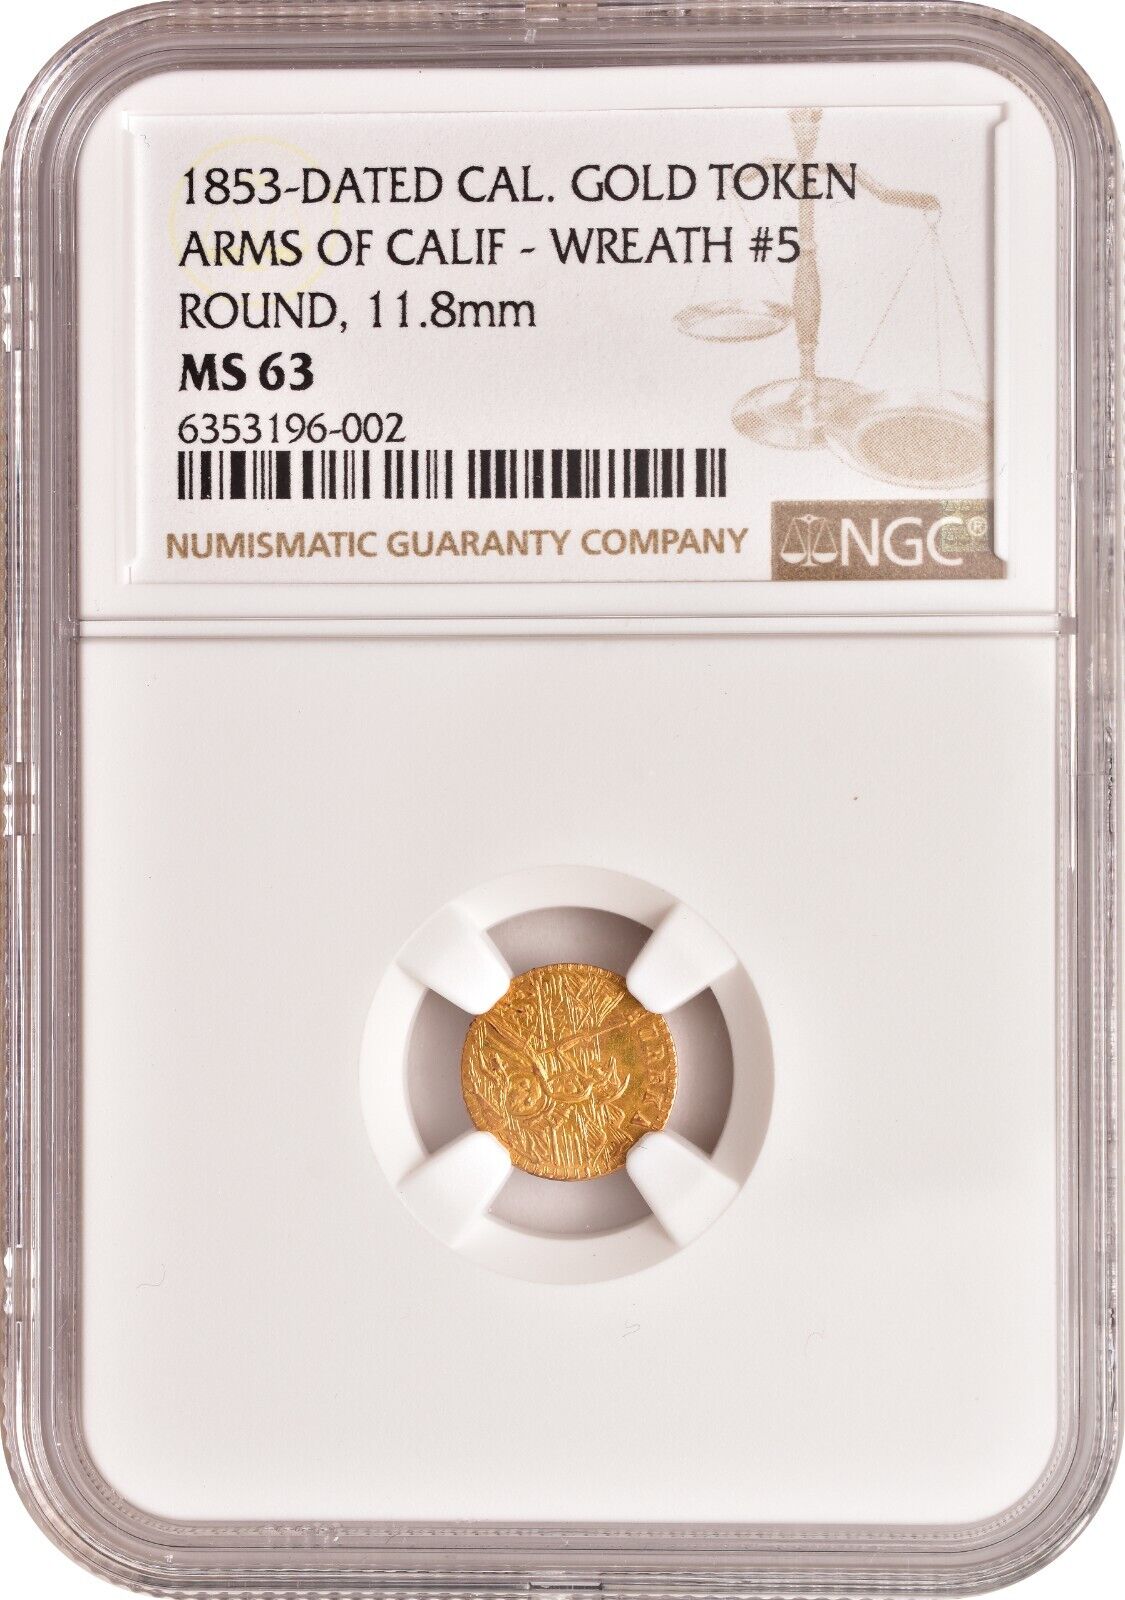 1853 Dated Cal. Gold Token Arms of California - Wreath #5 Round 11.8mm NGC MS63